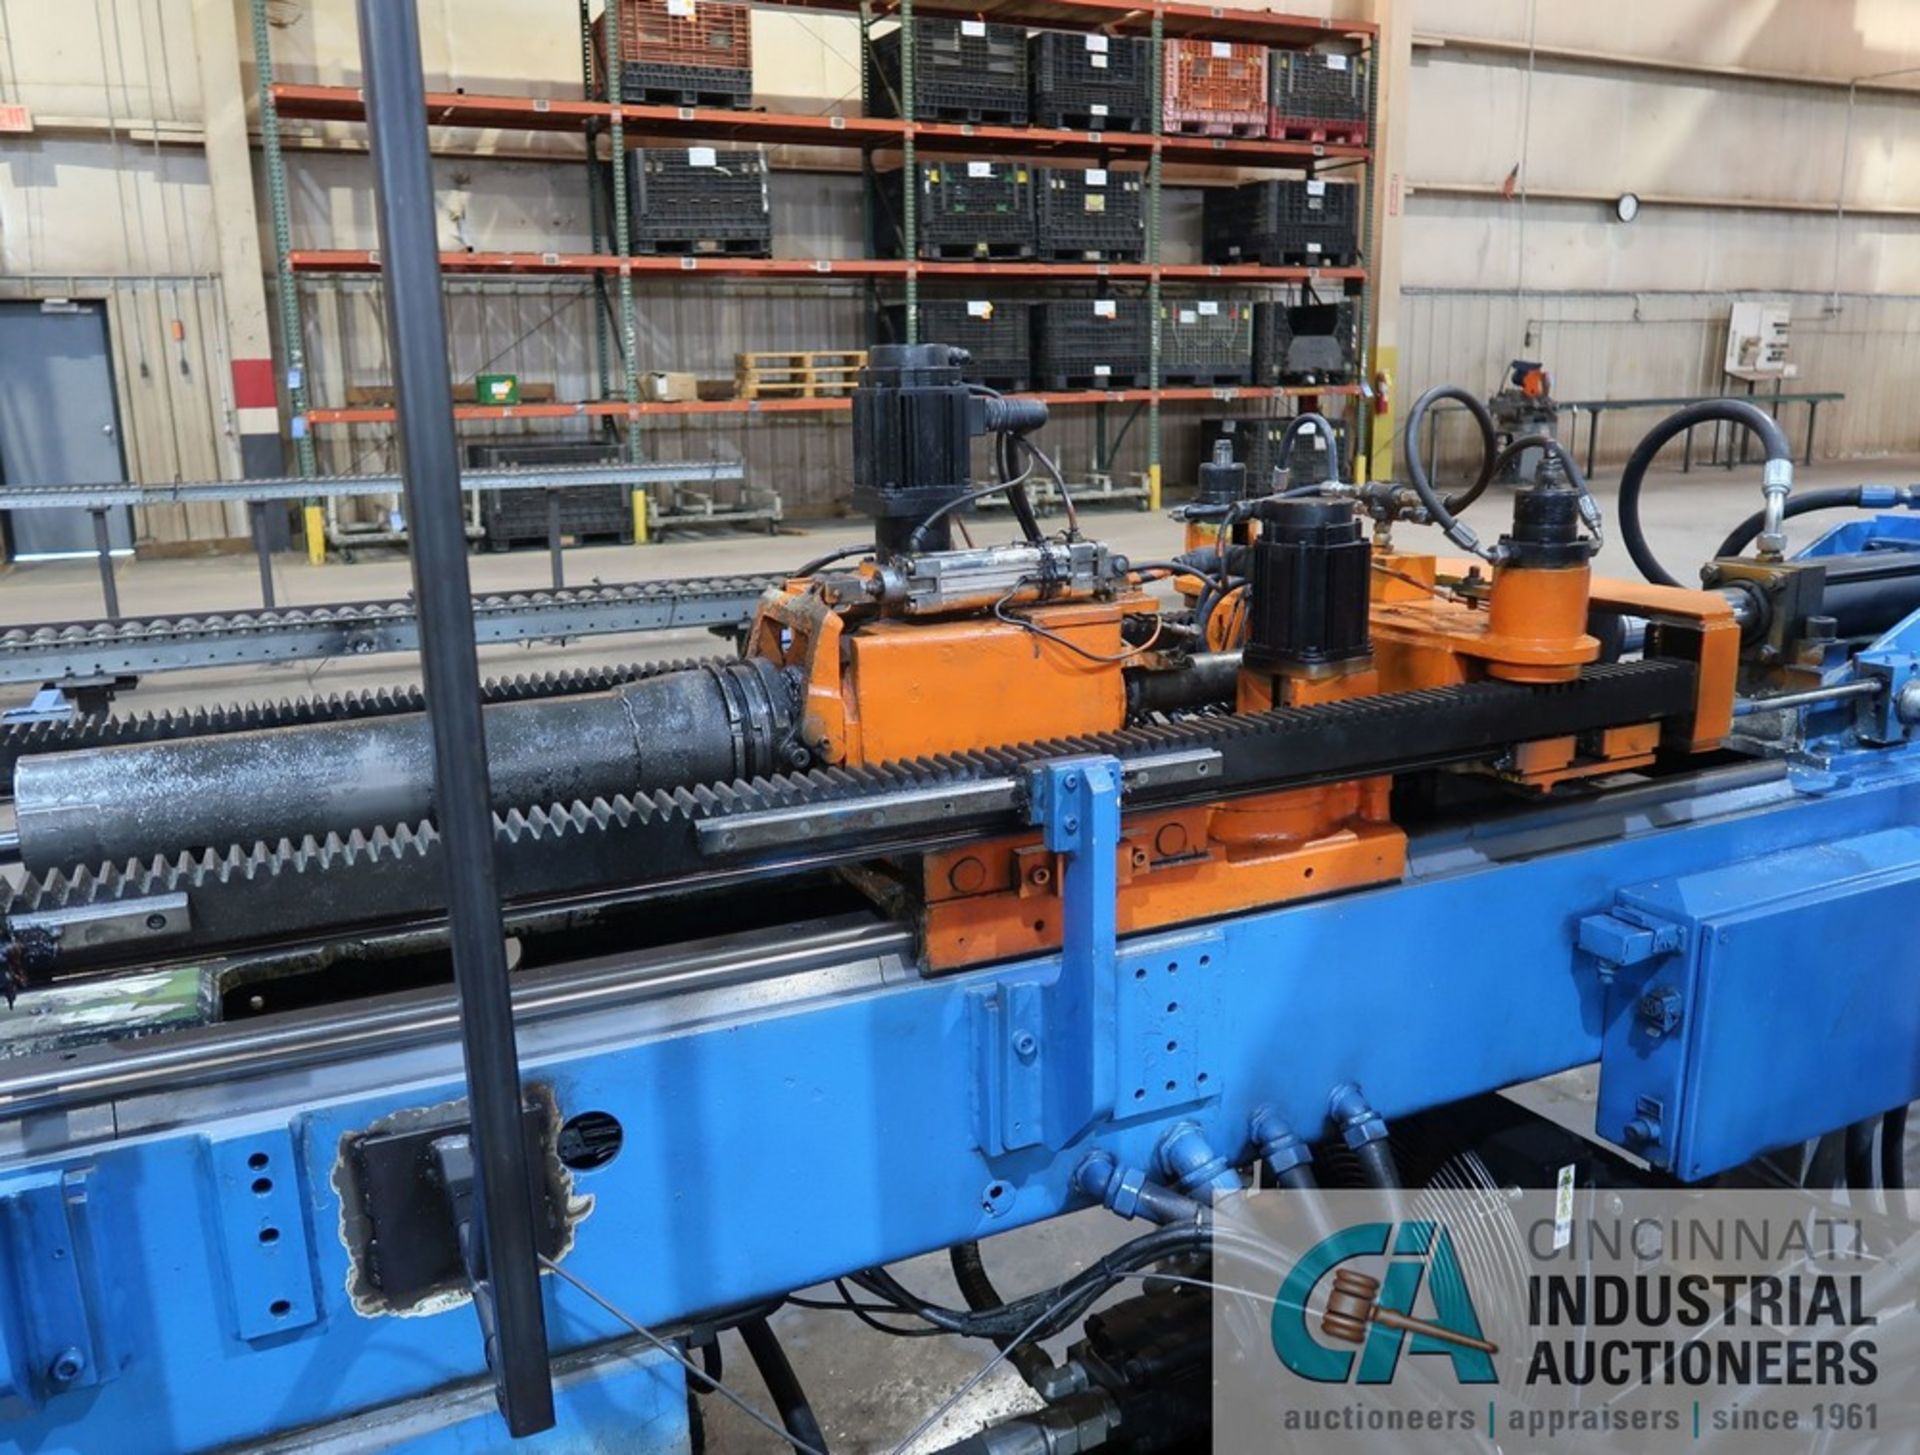 3" ADDISON MODEL DB76-TB TRAVELING BOOST CNC HYDRAULIC TUBE BENDER; S/N 10035, ASSET NO. ABCC-7, - Image 13 of 17